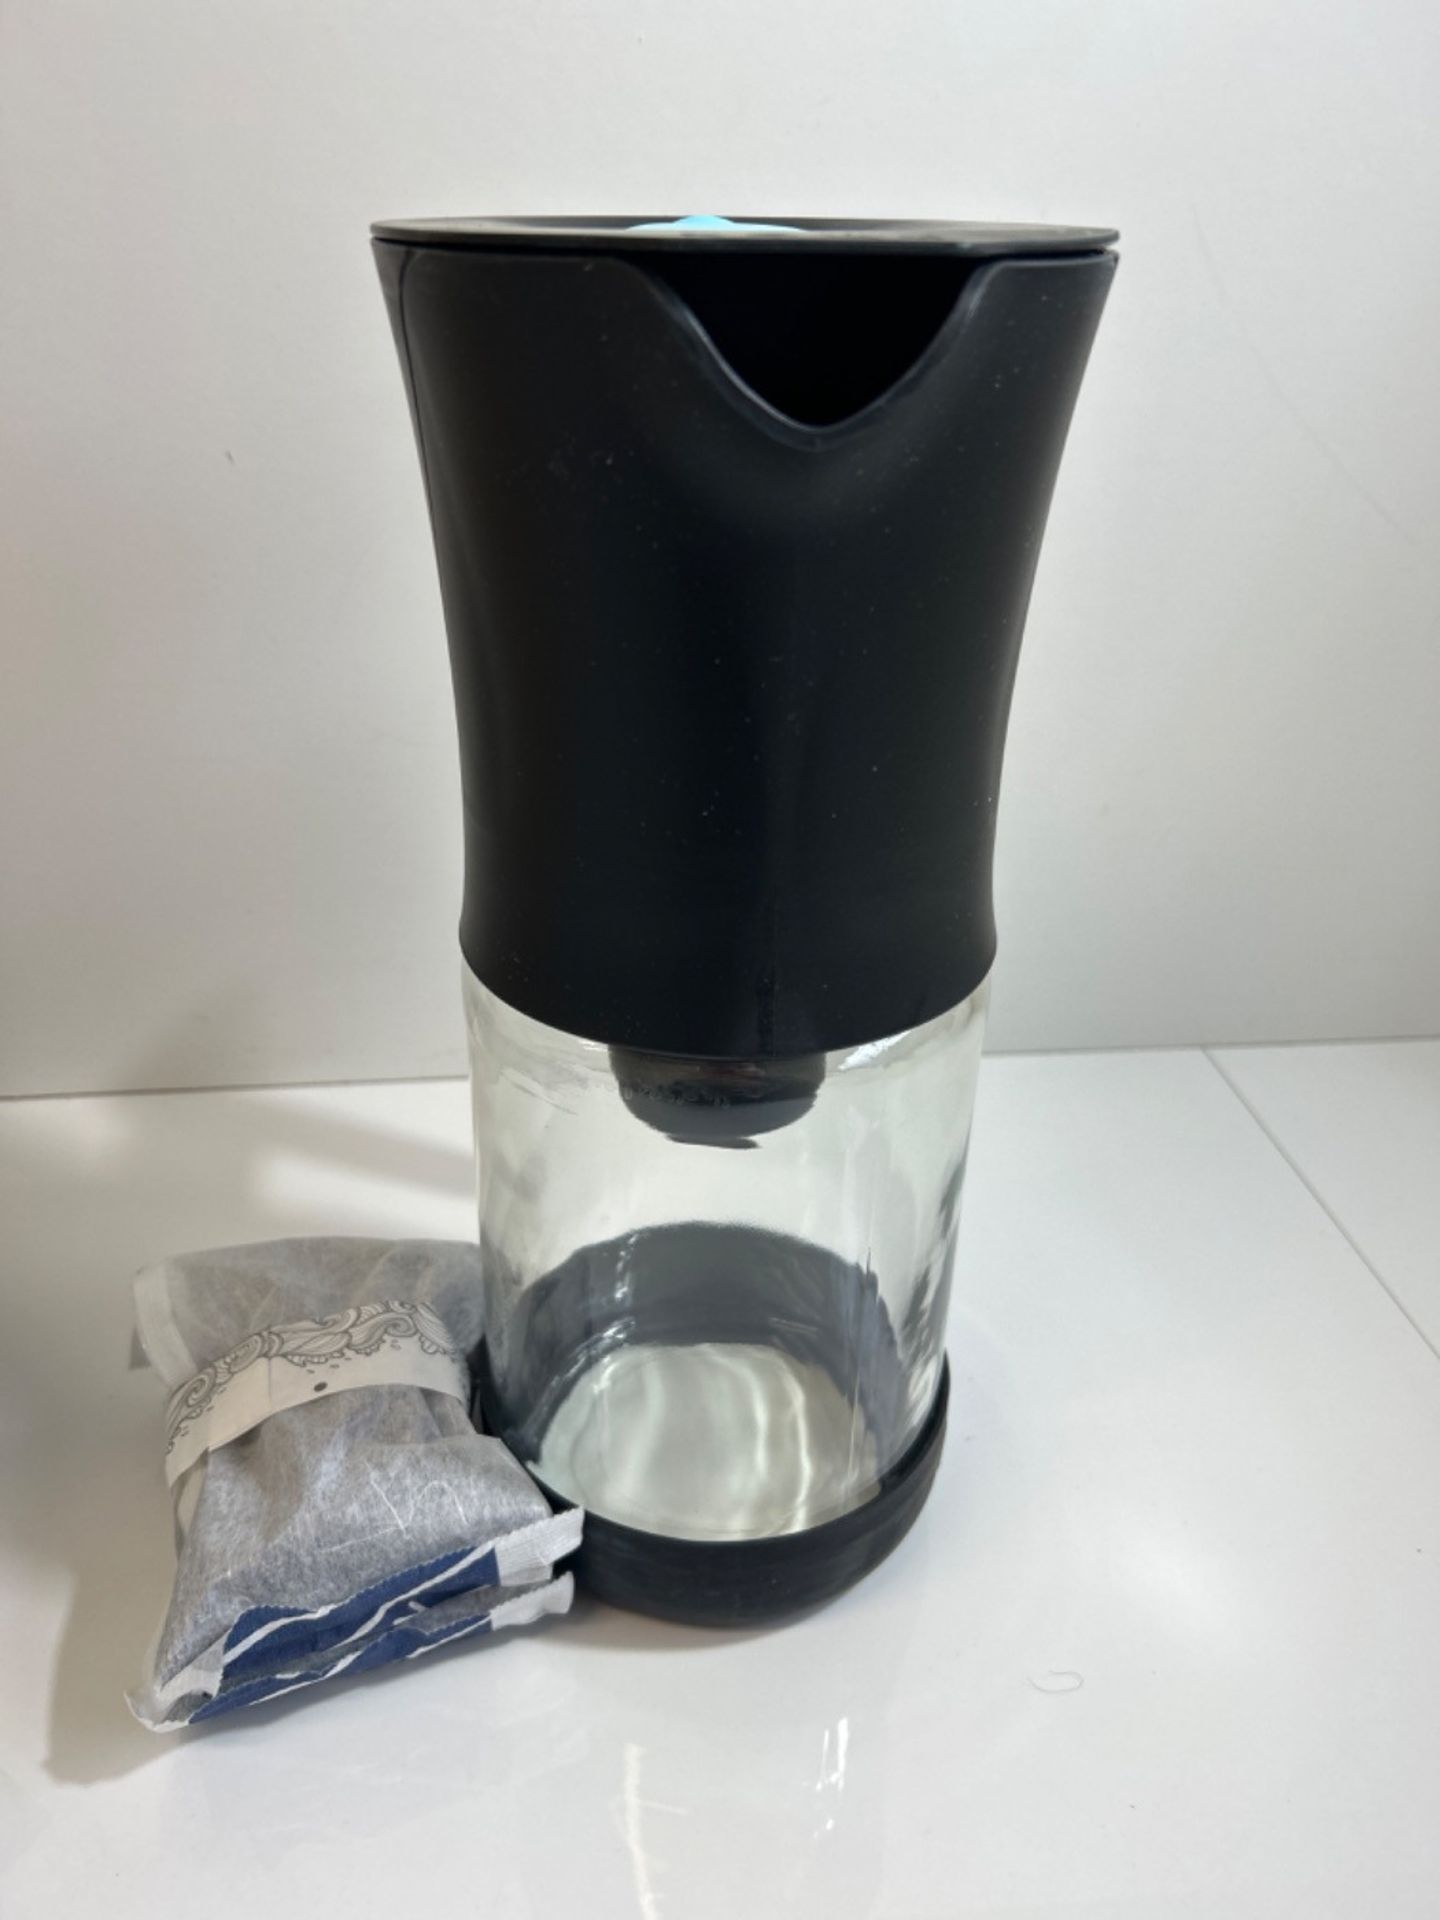 Phox V2 Water Filter | 2.2L Glass Water Filter Jug and Cartridge | 3 Month Supply (Clean Pack) - Image 2 of 3